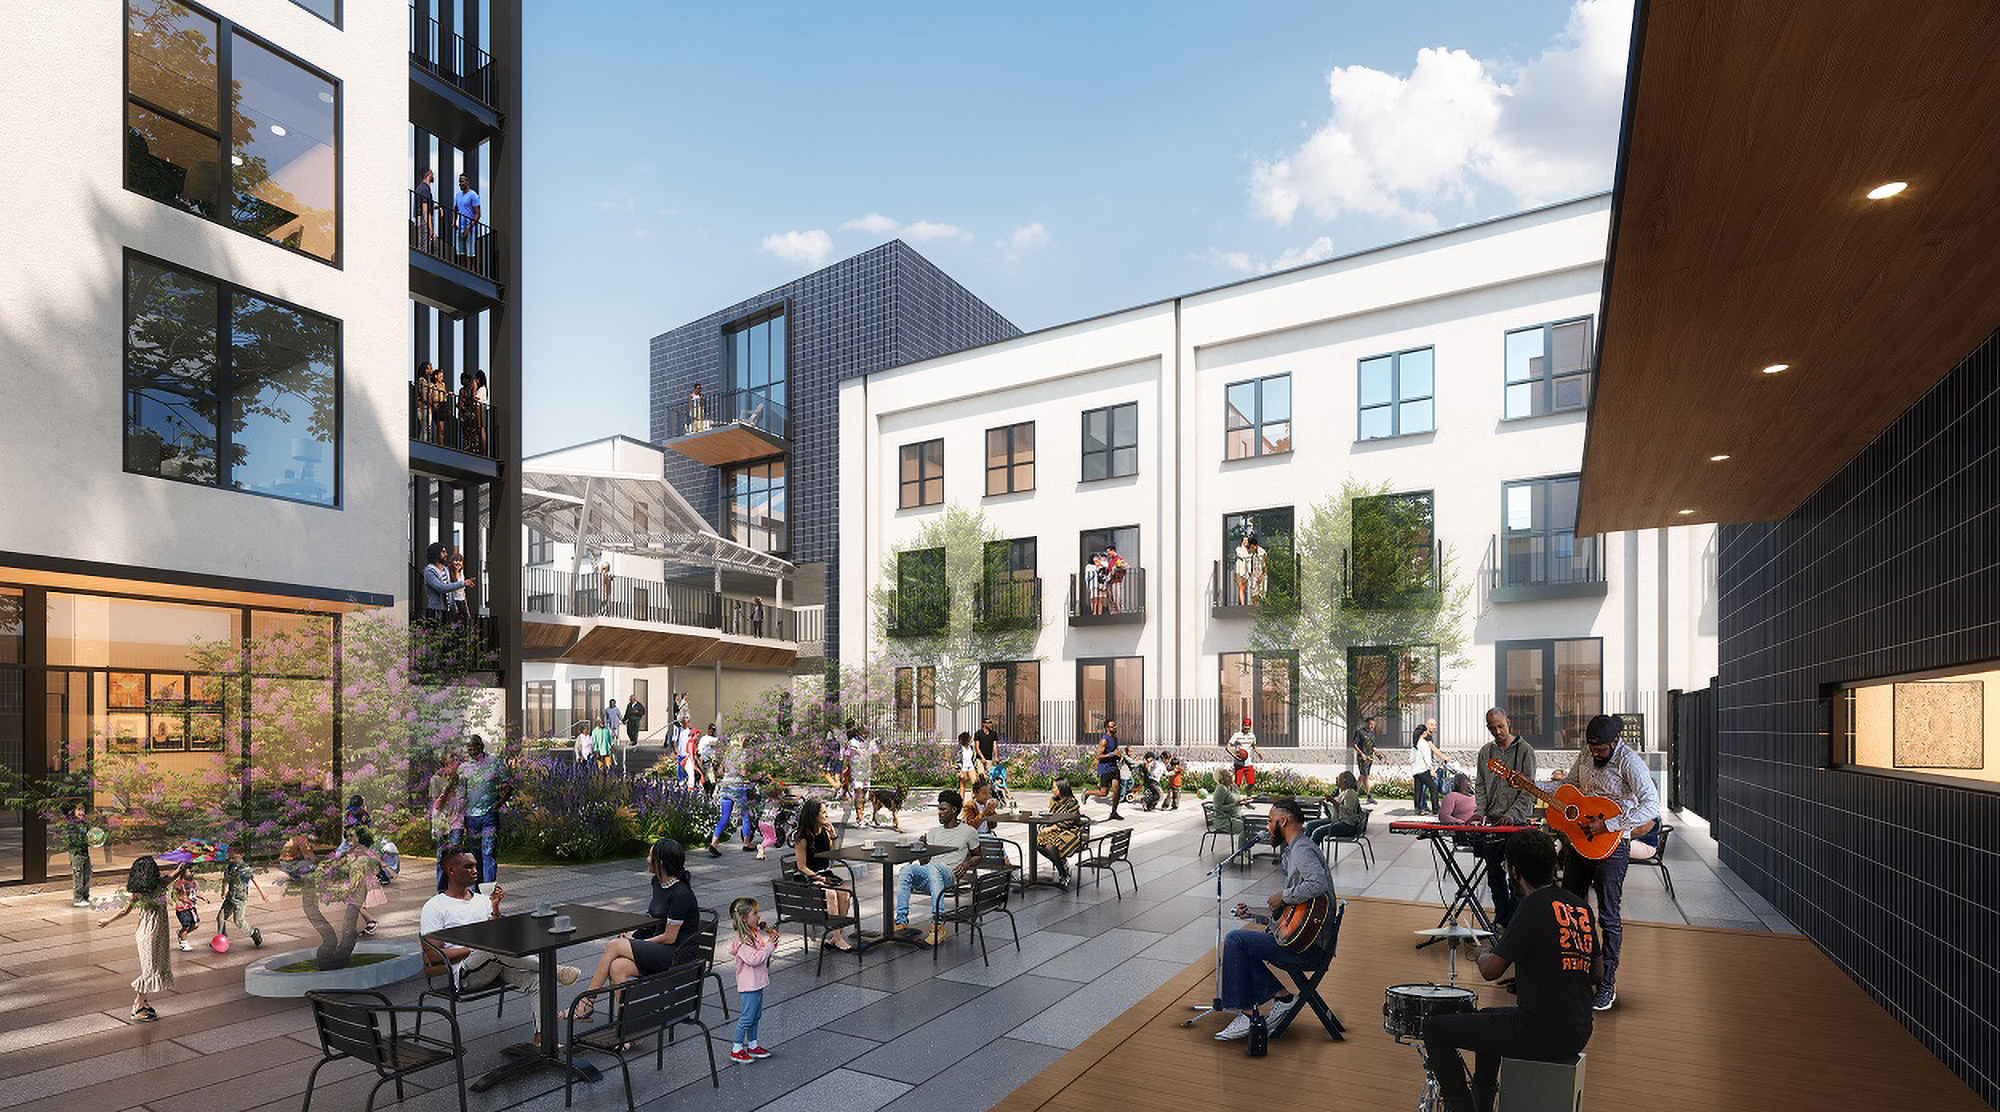 Rendering of mixed-use multifamily courtyard